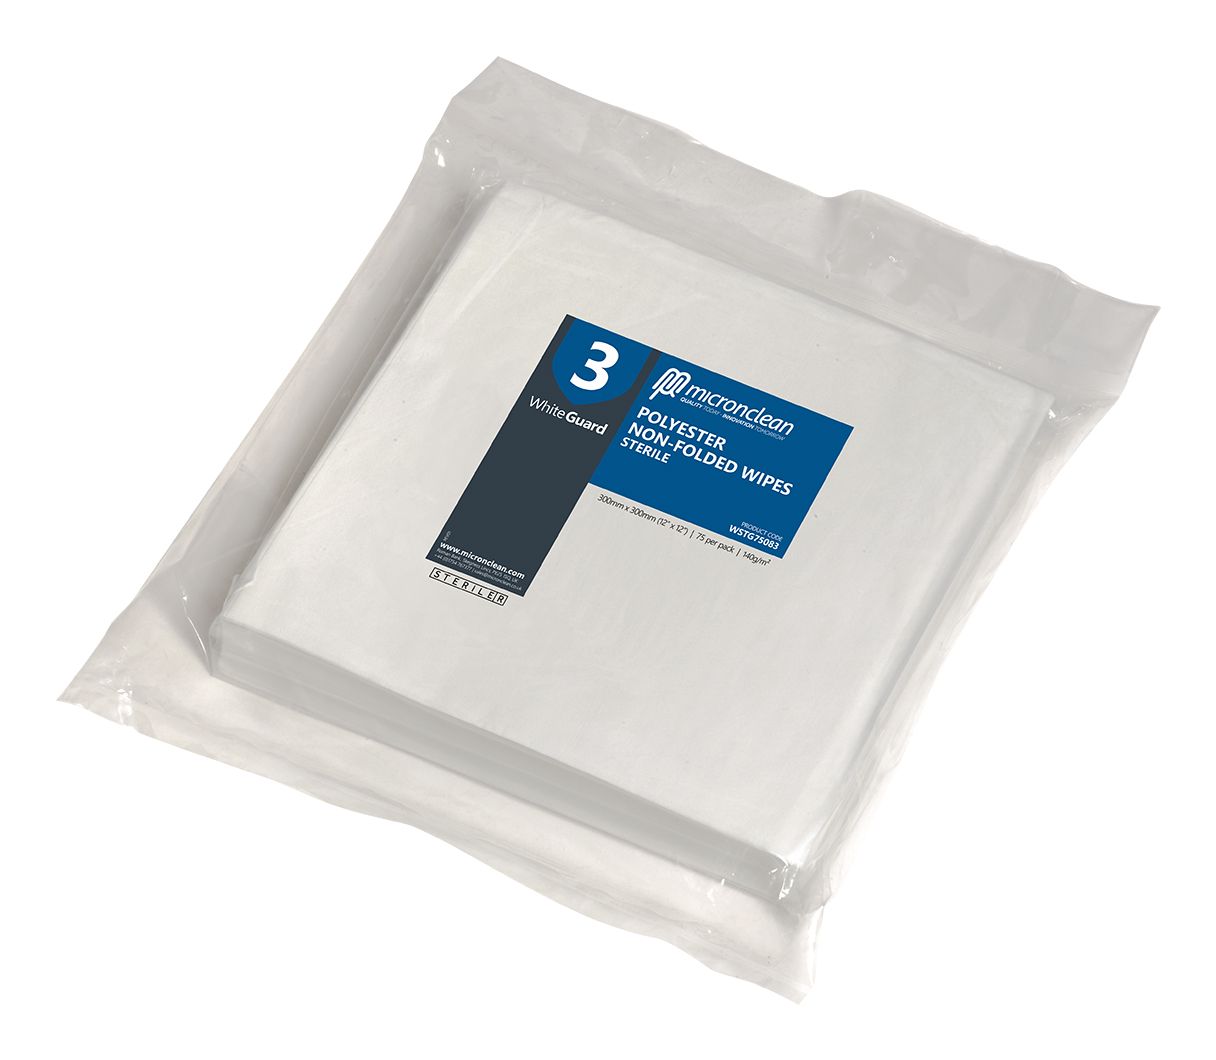 WhiteGuard 3 Laundered Polyester Wipes Non-Sterile [EU]